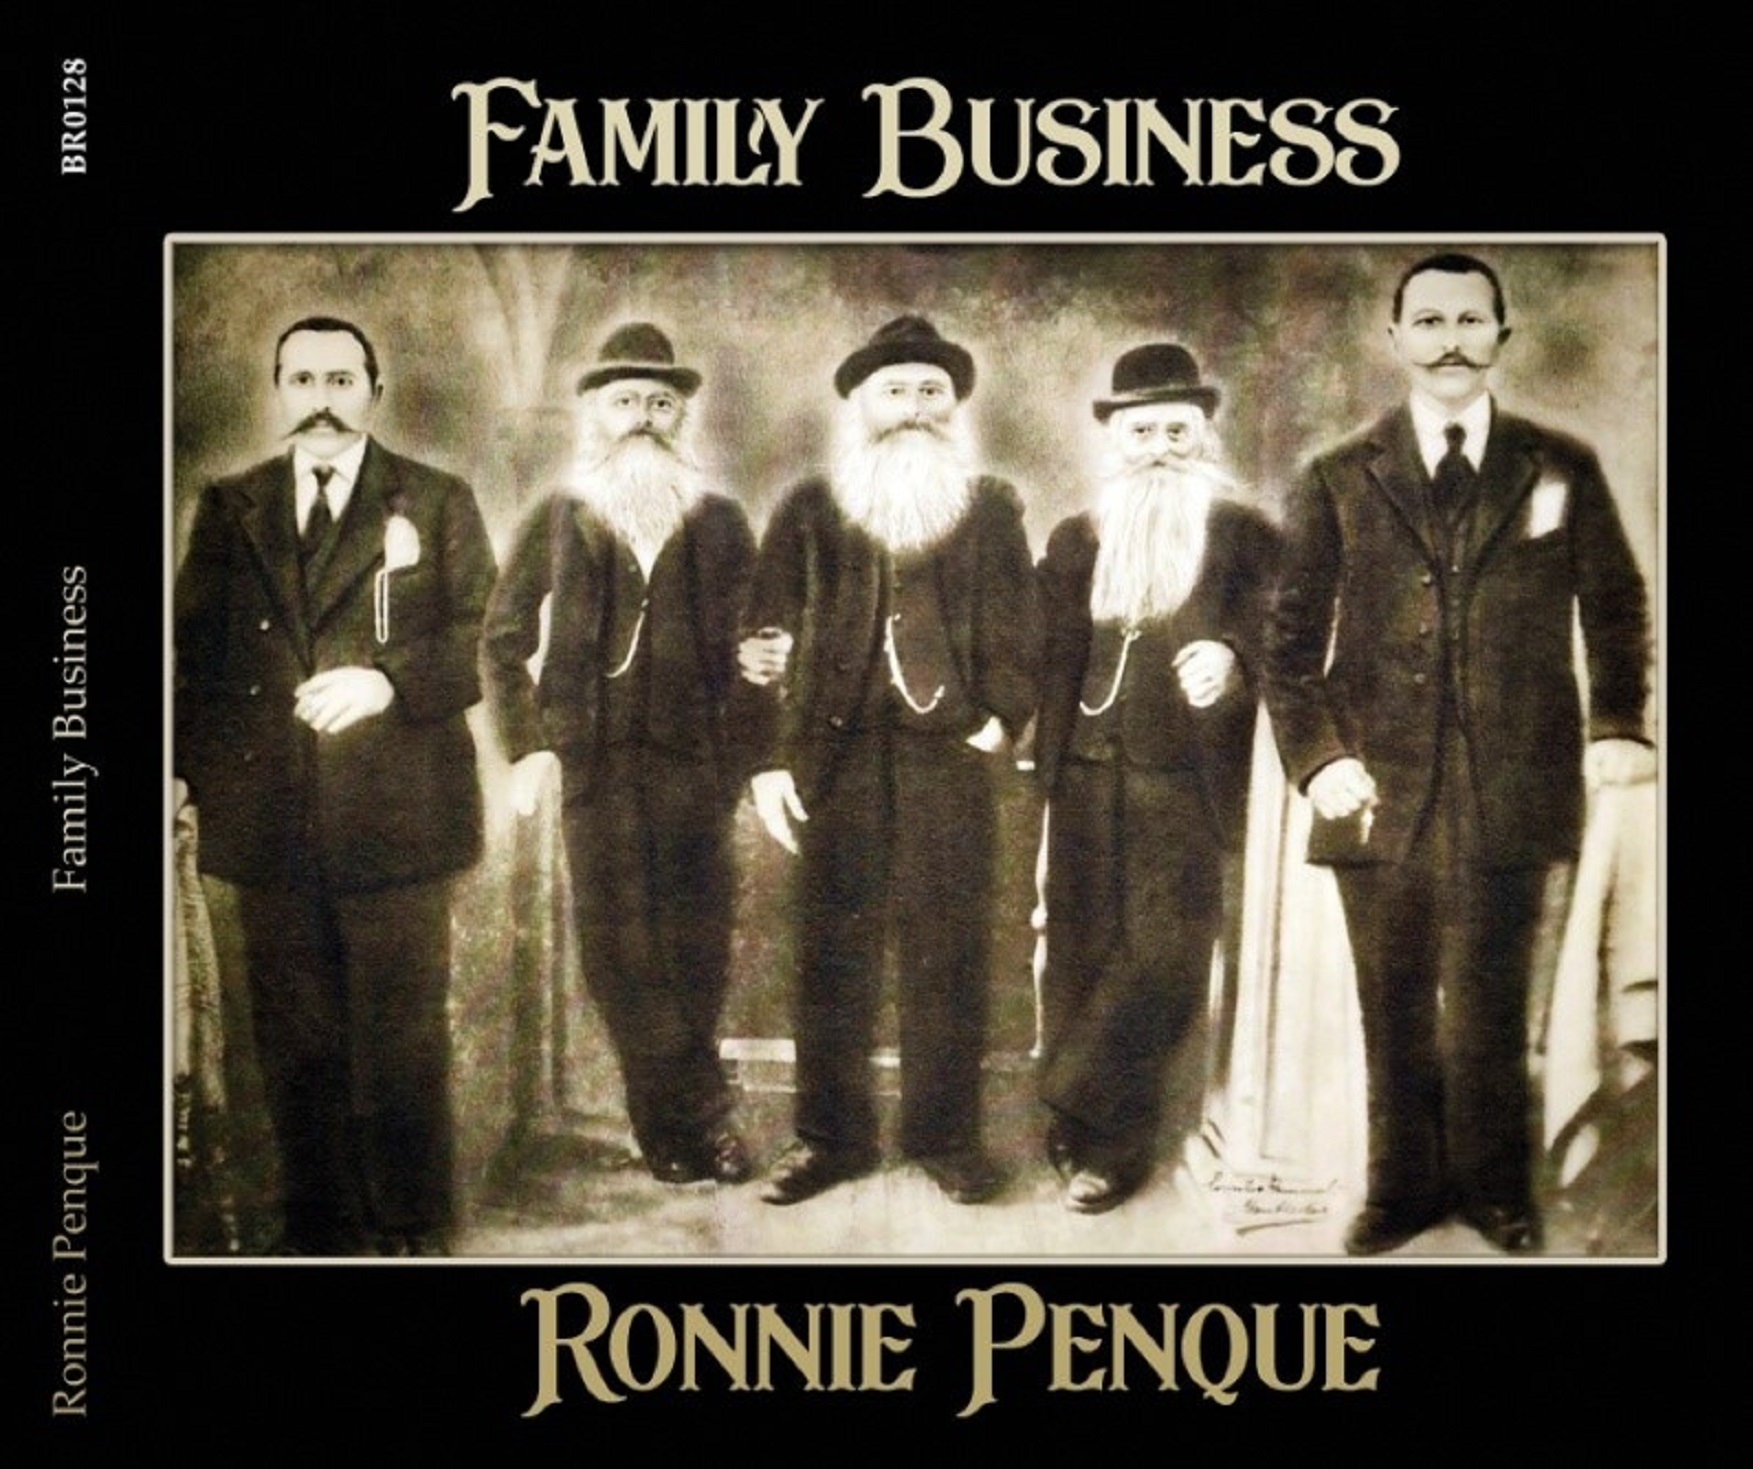 Ronnie Penque to release "Family Business" on 8/30